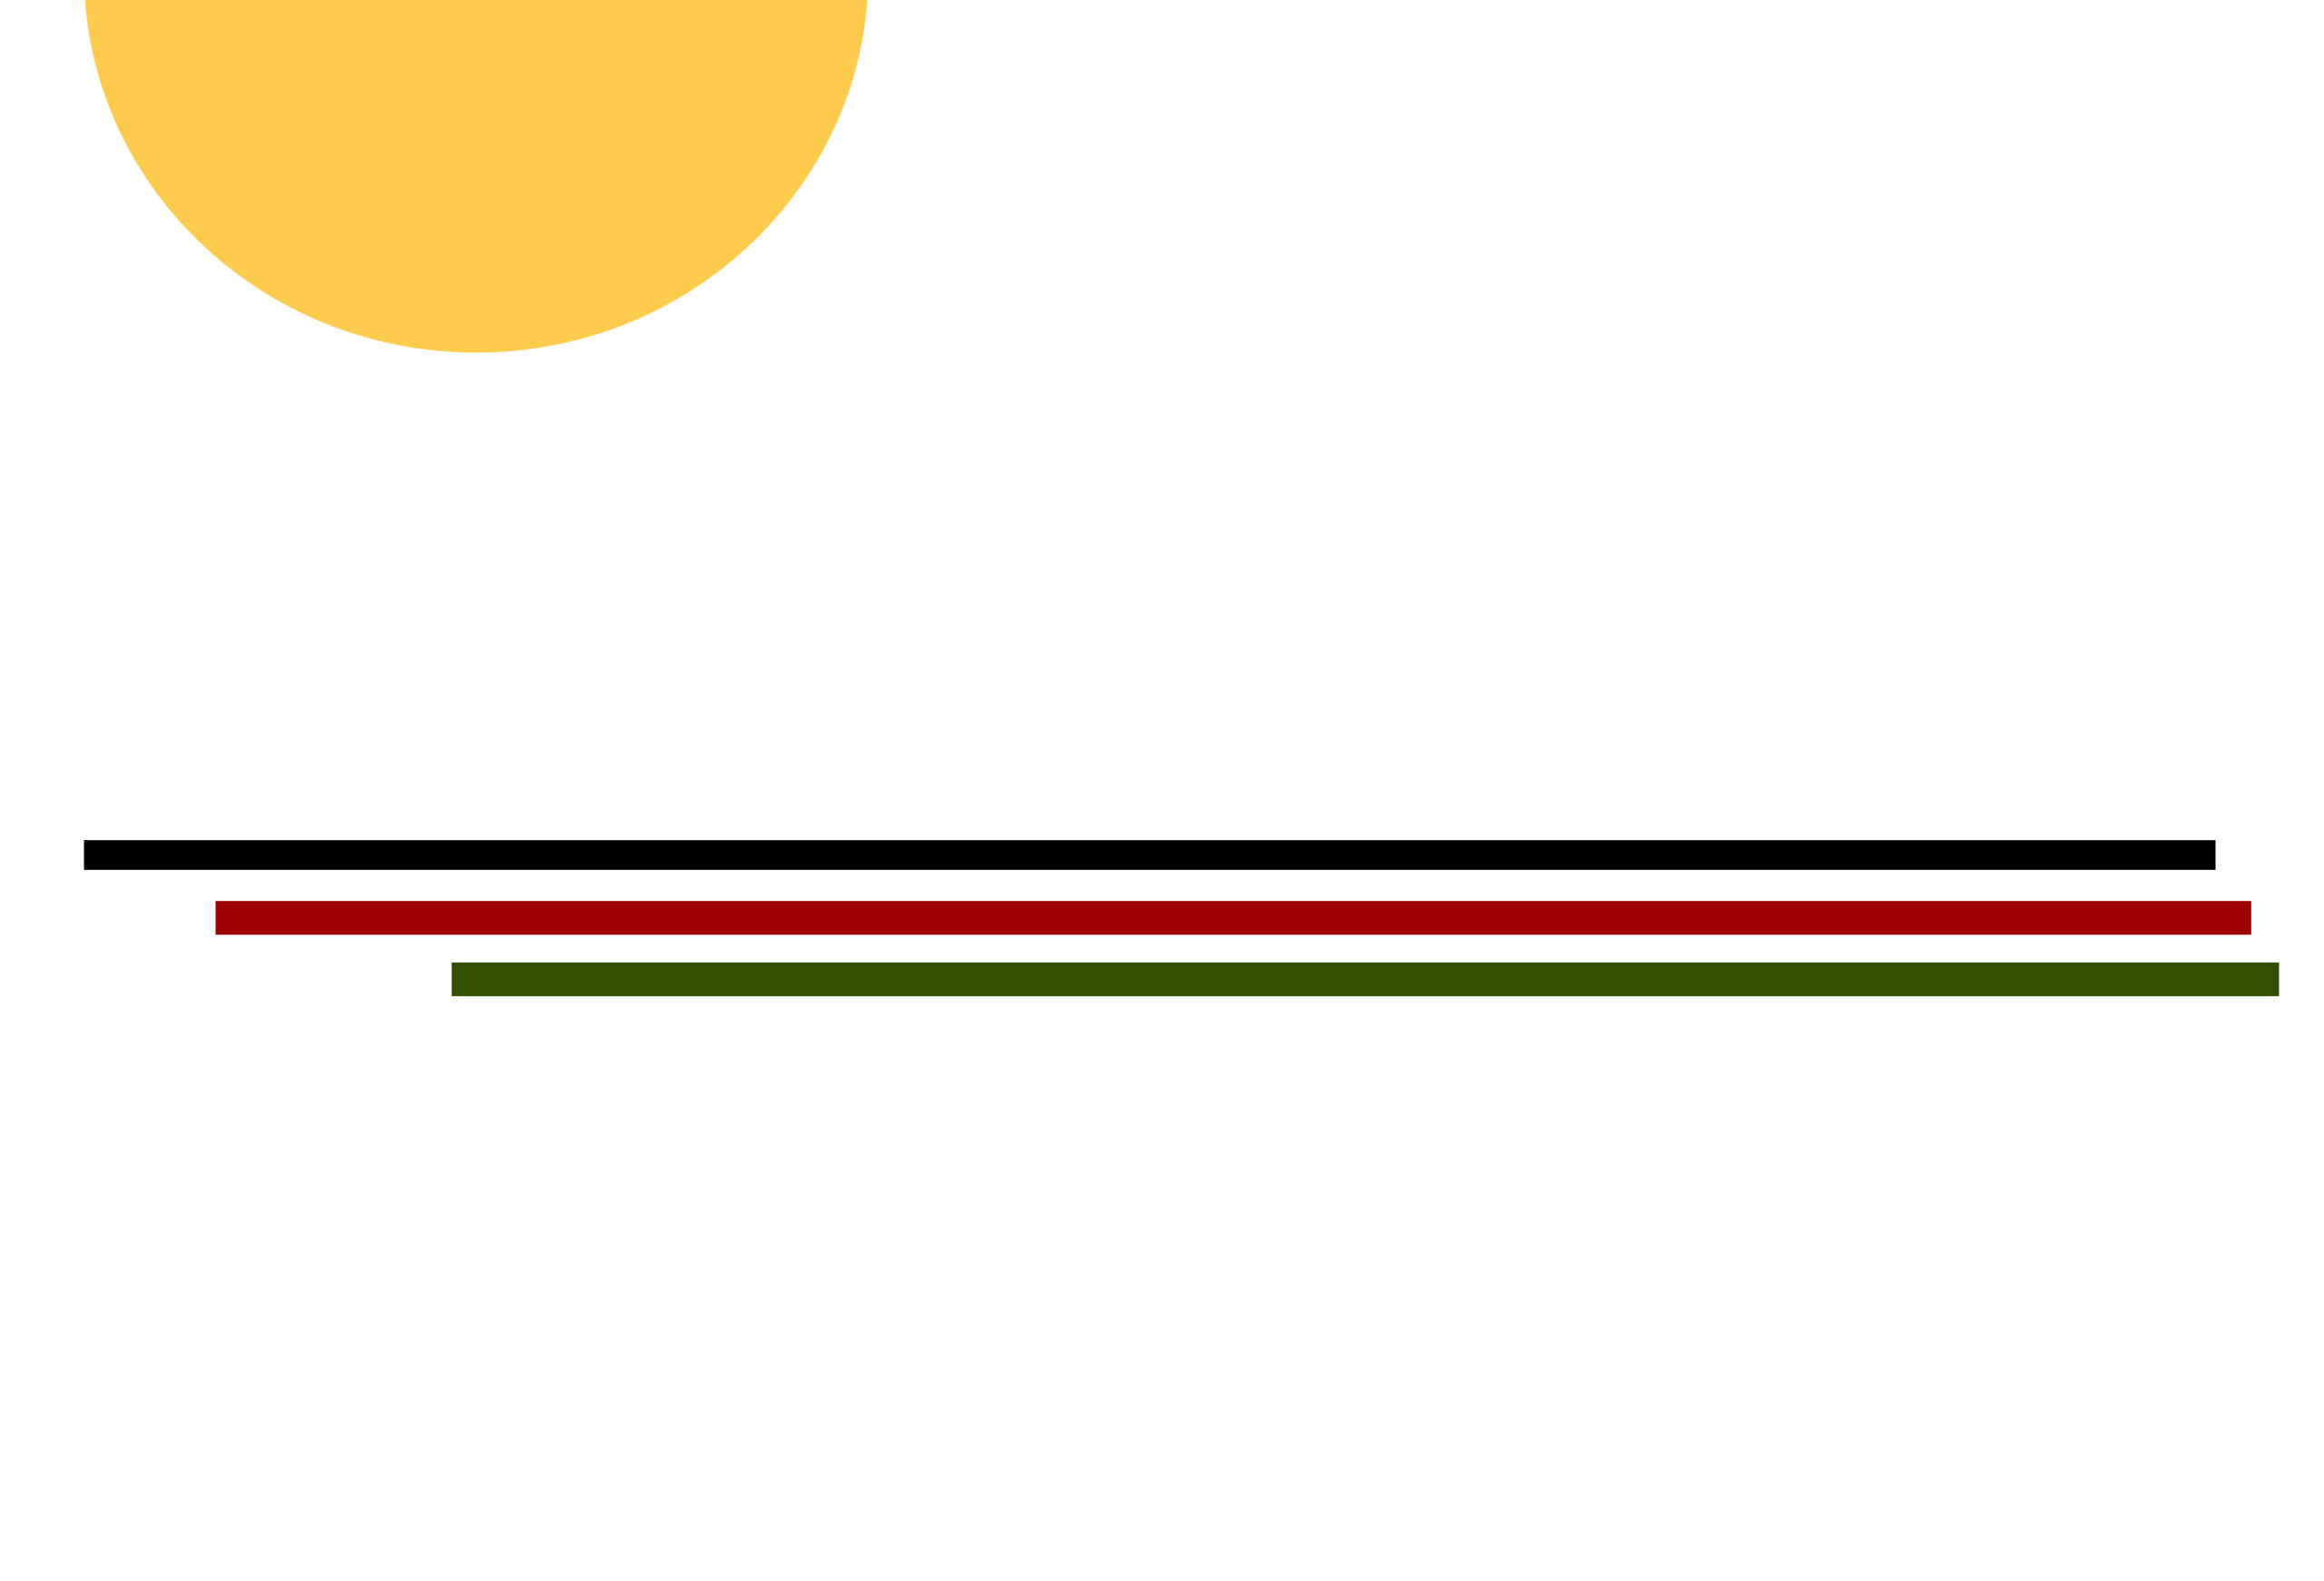 Half a sun above three stripes colors black, red and green